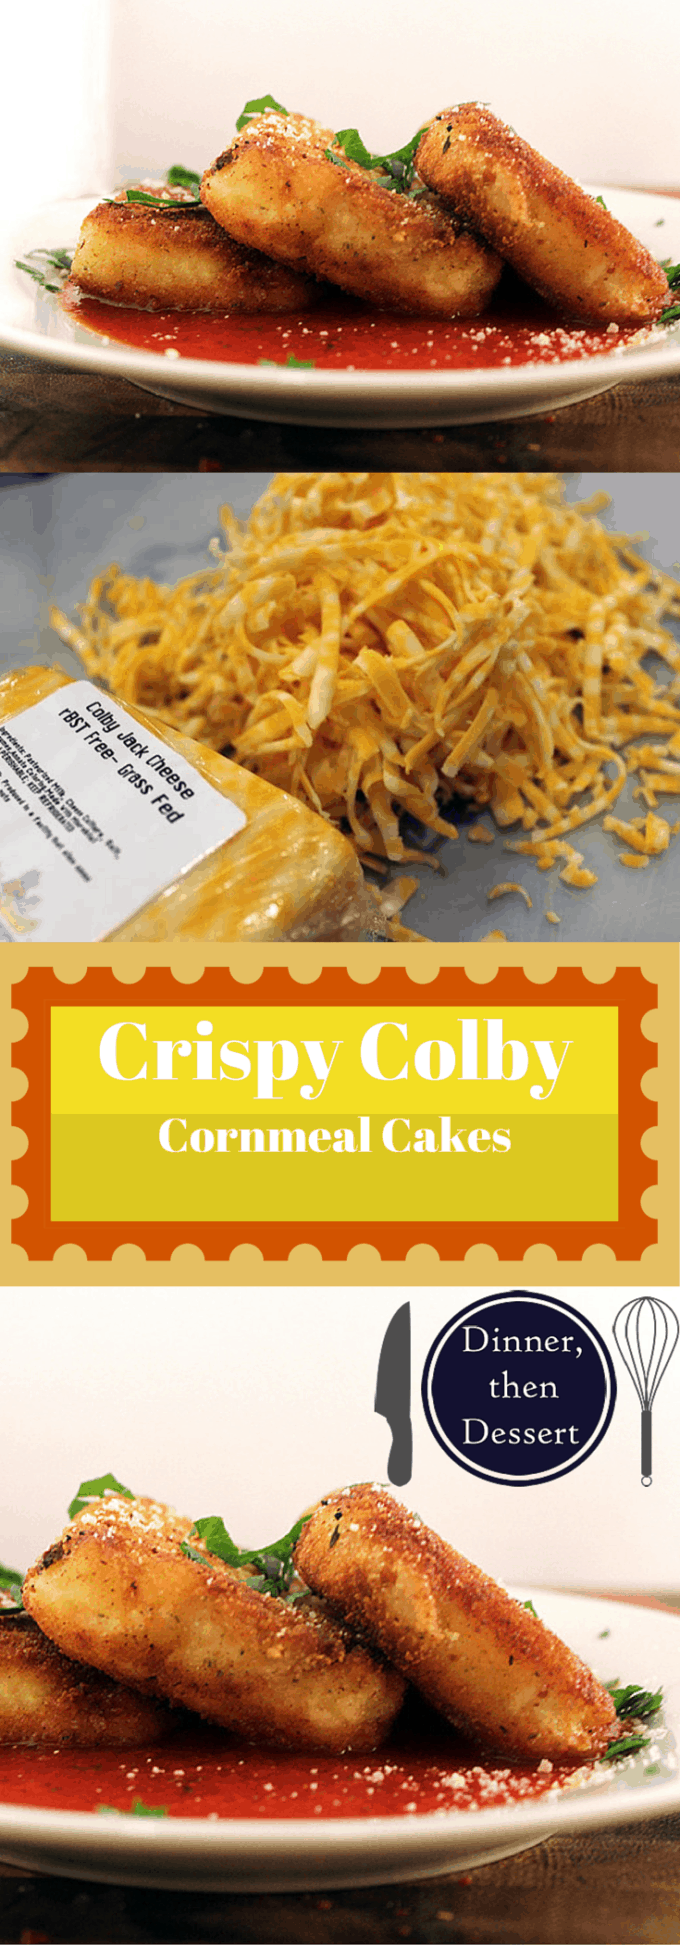 Colby Cornmeal Cakes collage